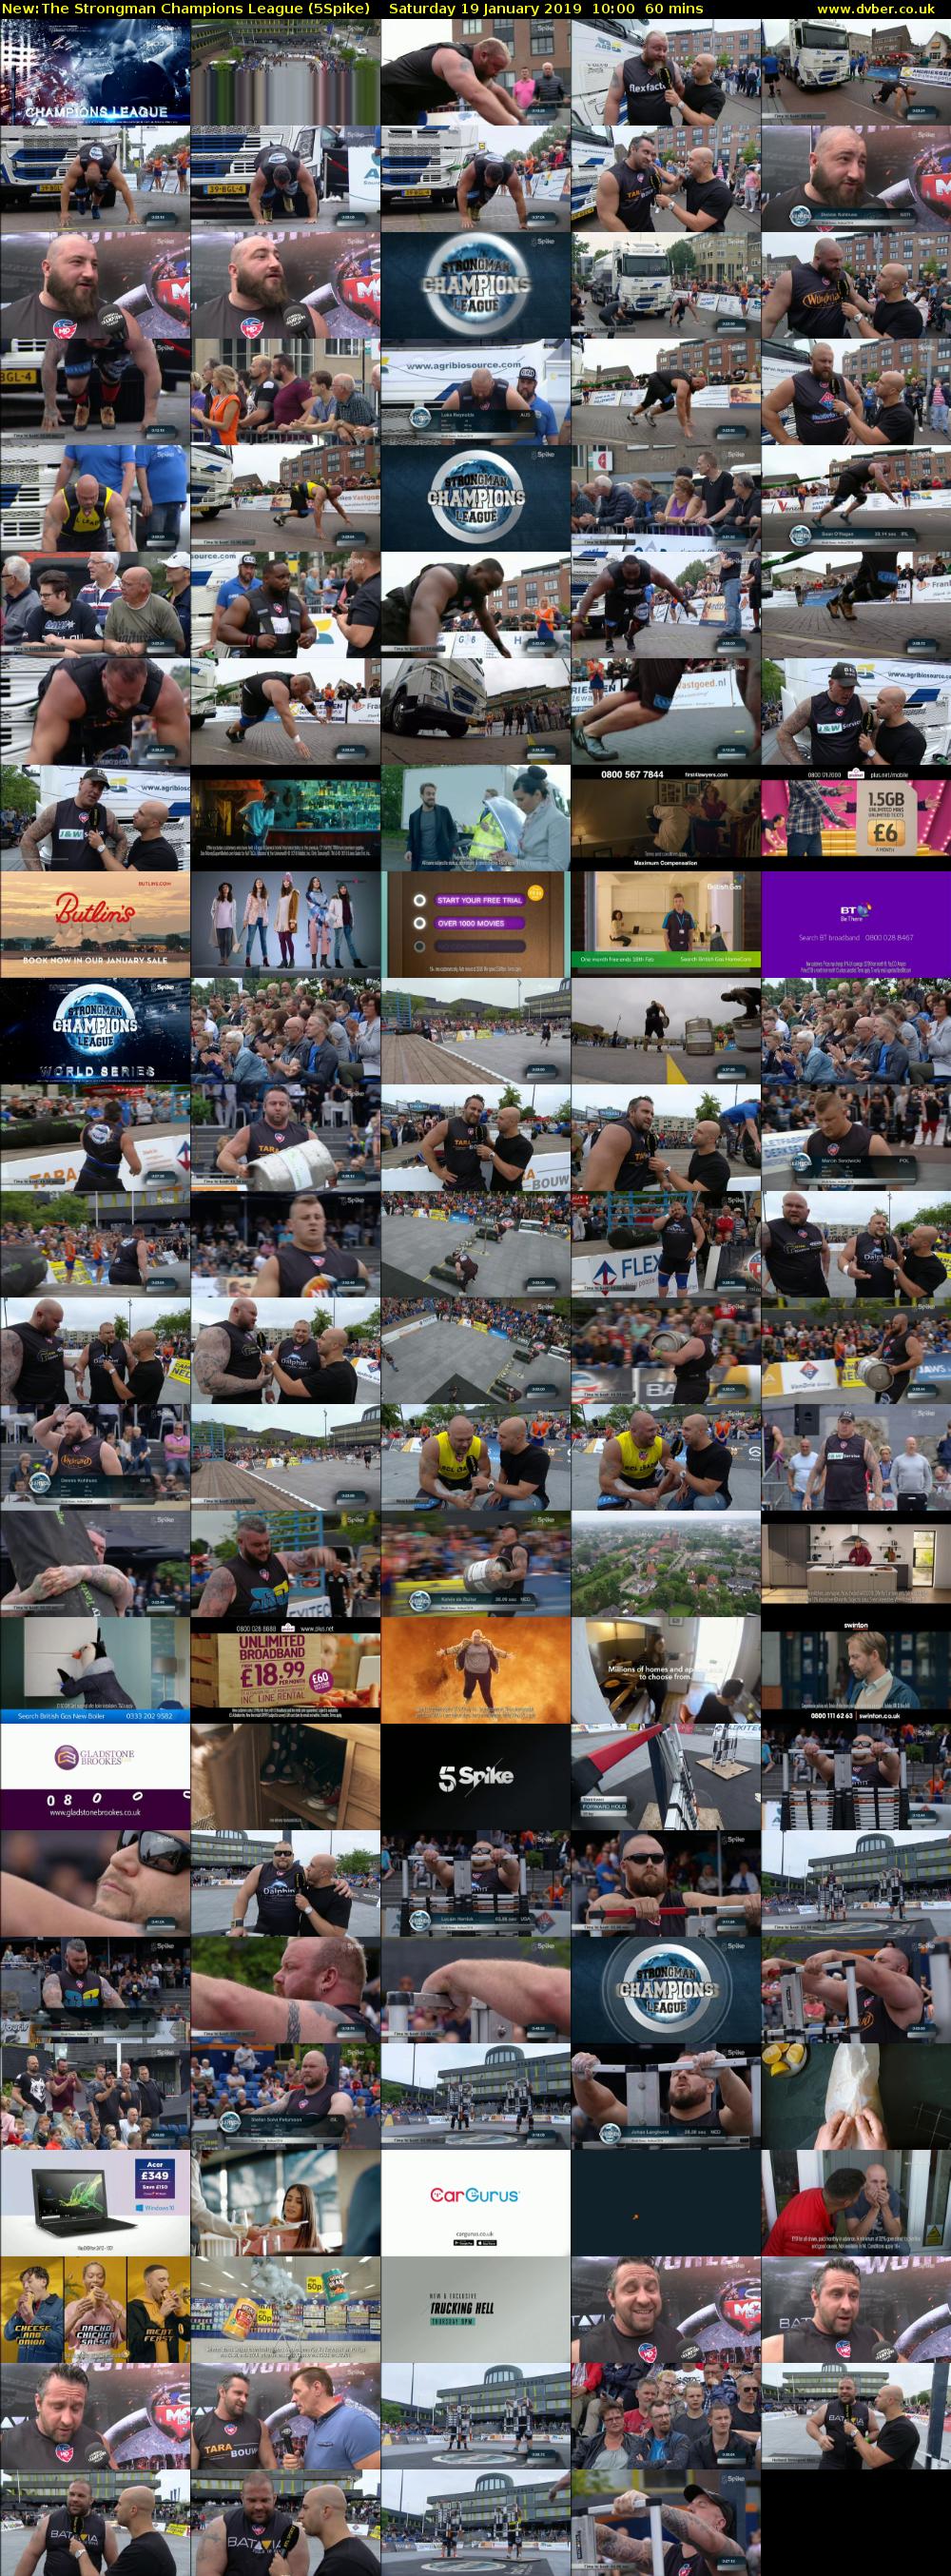 The Strongman Champions League (5Spike) Saturday 19 January 2019 10:00 - 11:00